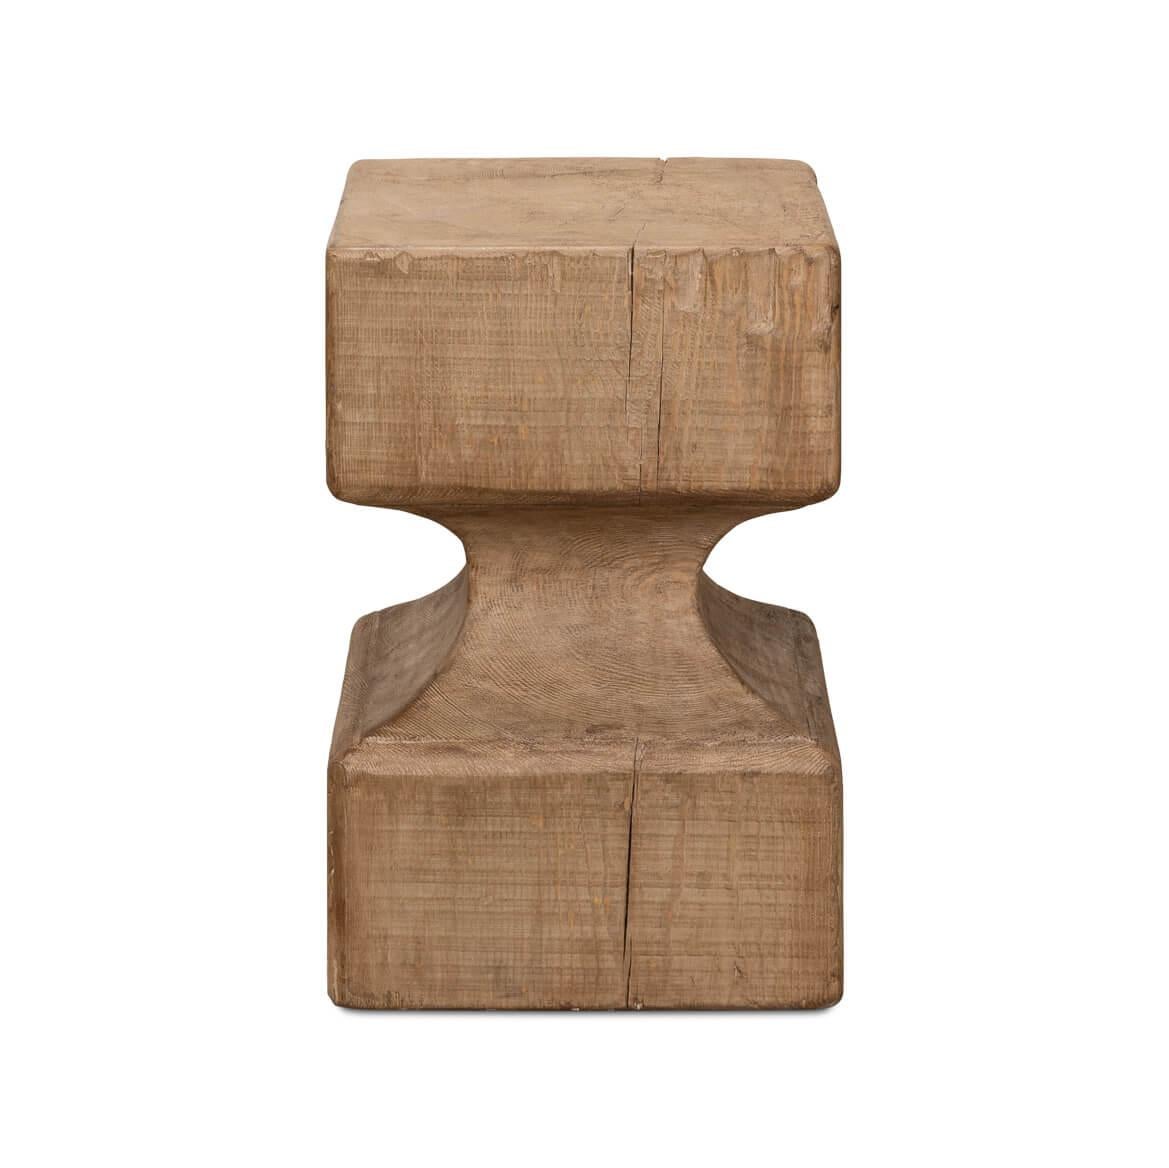 Hand-carved from a robust square beam. Each groove and gnaw mark tells a story of creation, making this piece not just a stool but conversational artwork.

Whether it's used as a charming perch by the fireplace, a novel bedside table, or an accent